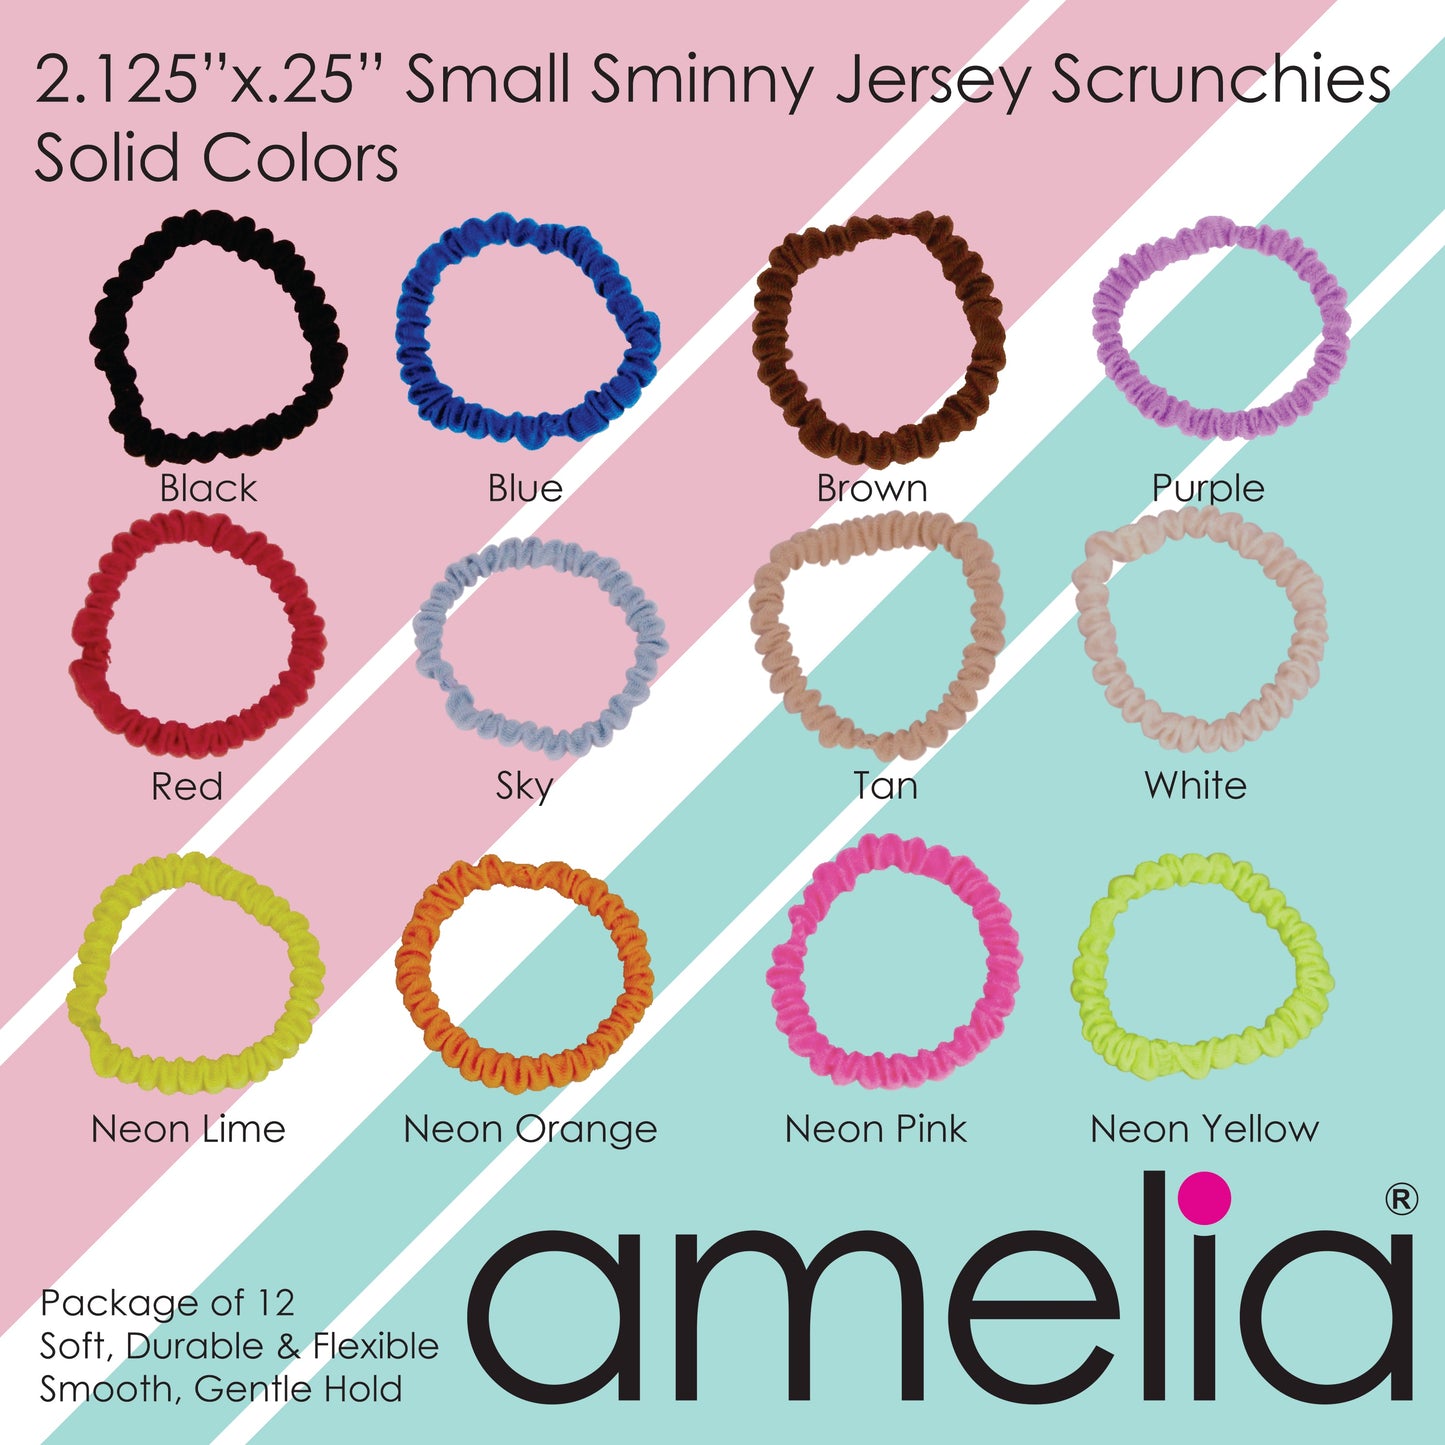 Amelia Beauty, Black with White Dots Skinny Jersey Scrunchies, 2.125in Diameter, Gentle on Hair, Strong Hold, No Snag, No Dents or Creases. 12 Pack